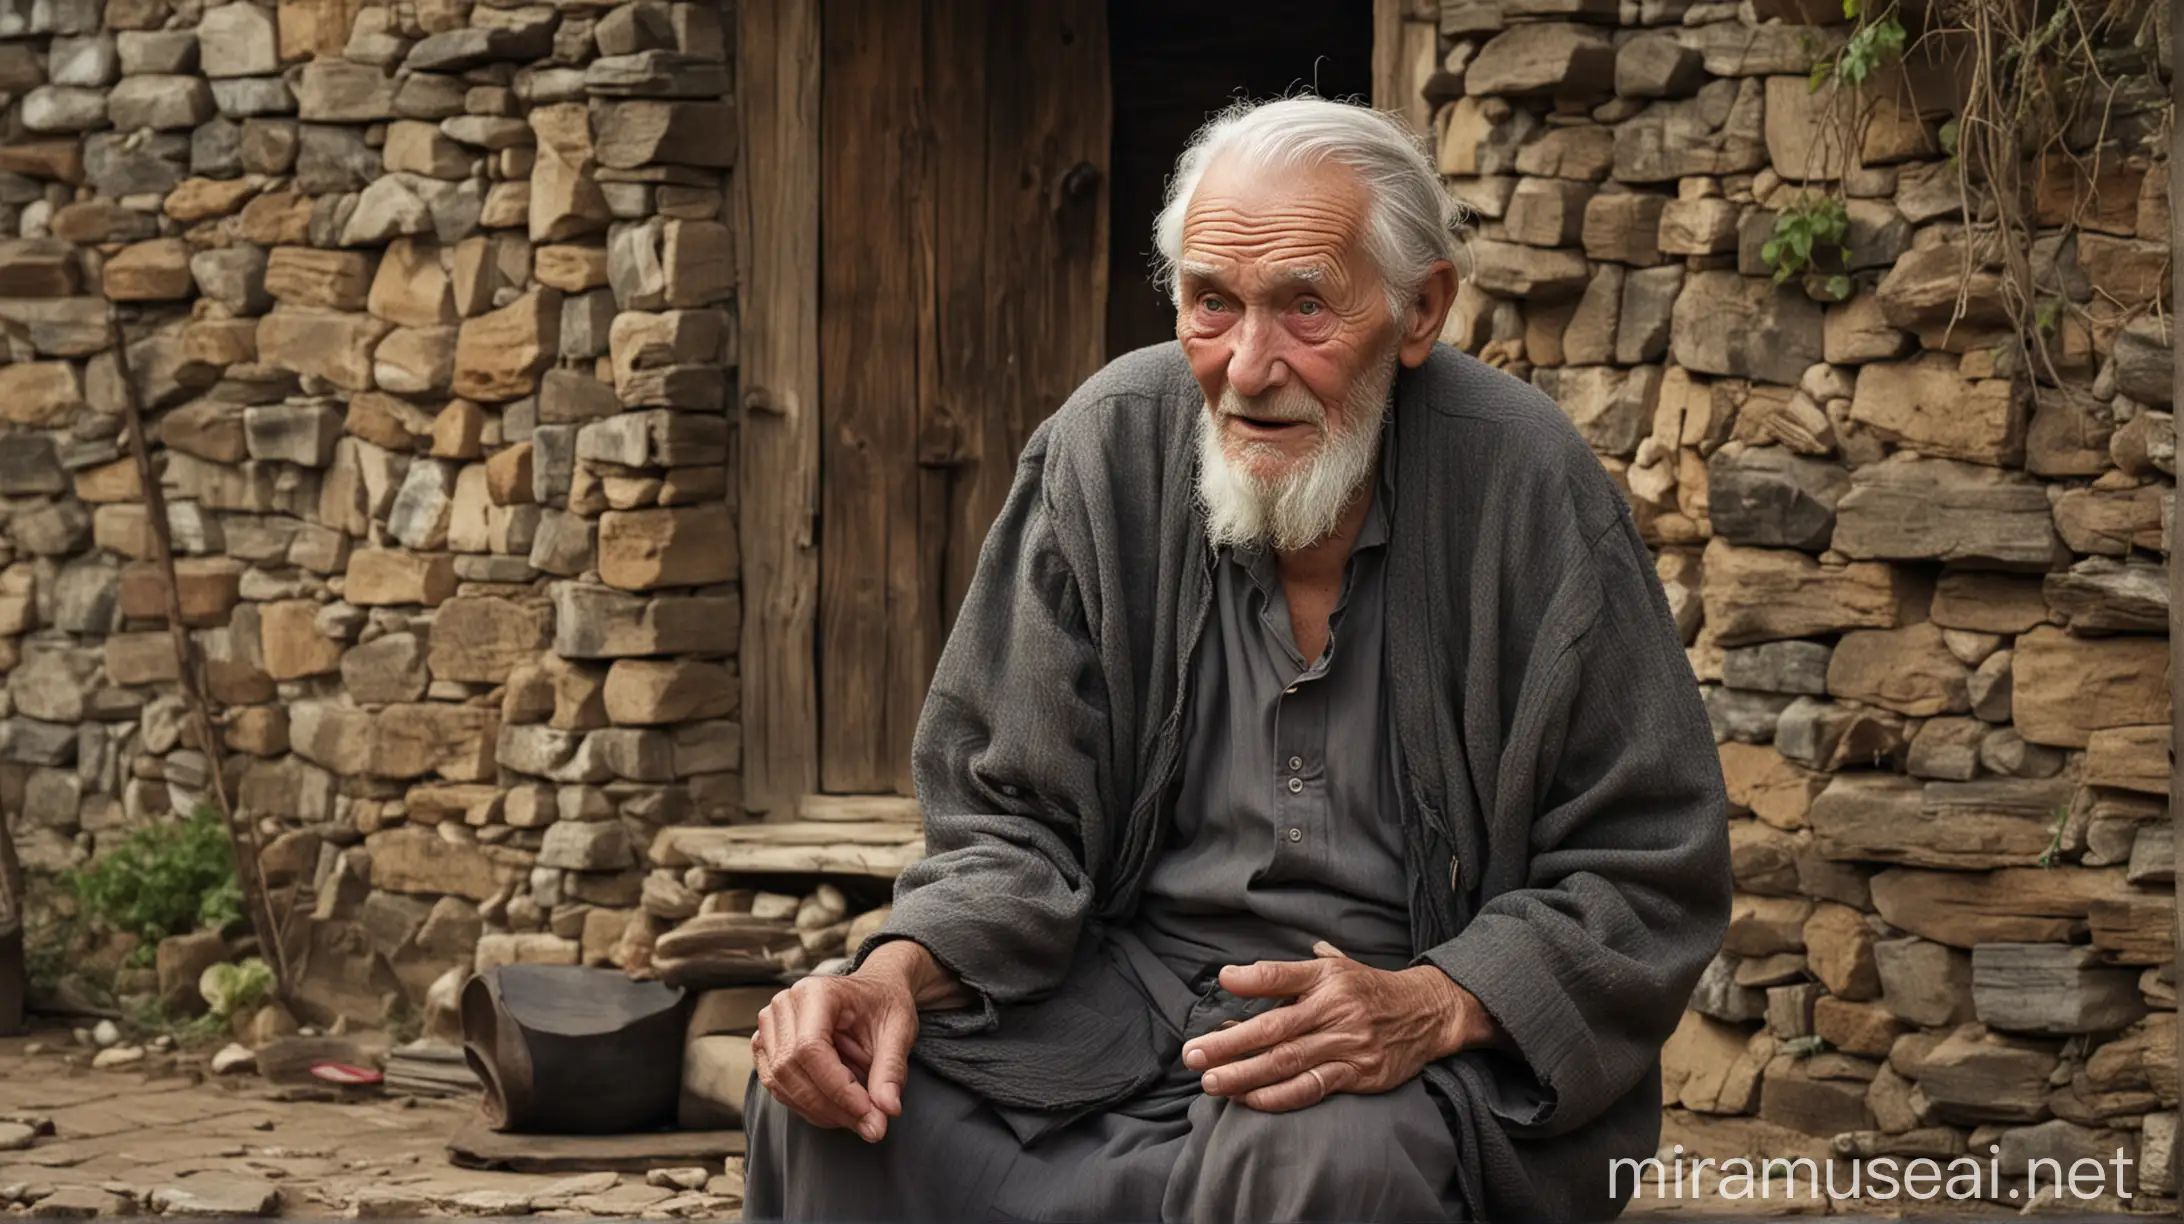 Elder Telling Parable in Traditional Village Setting